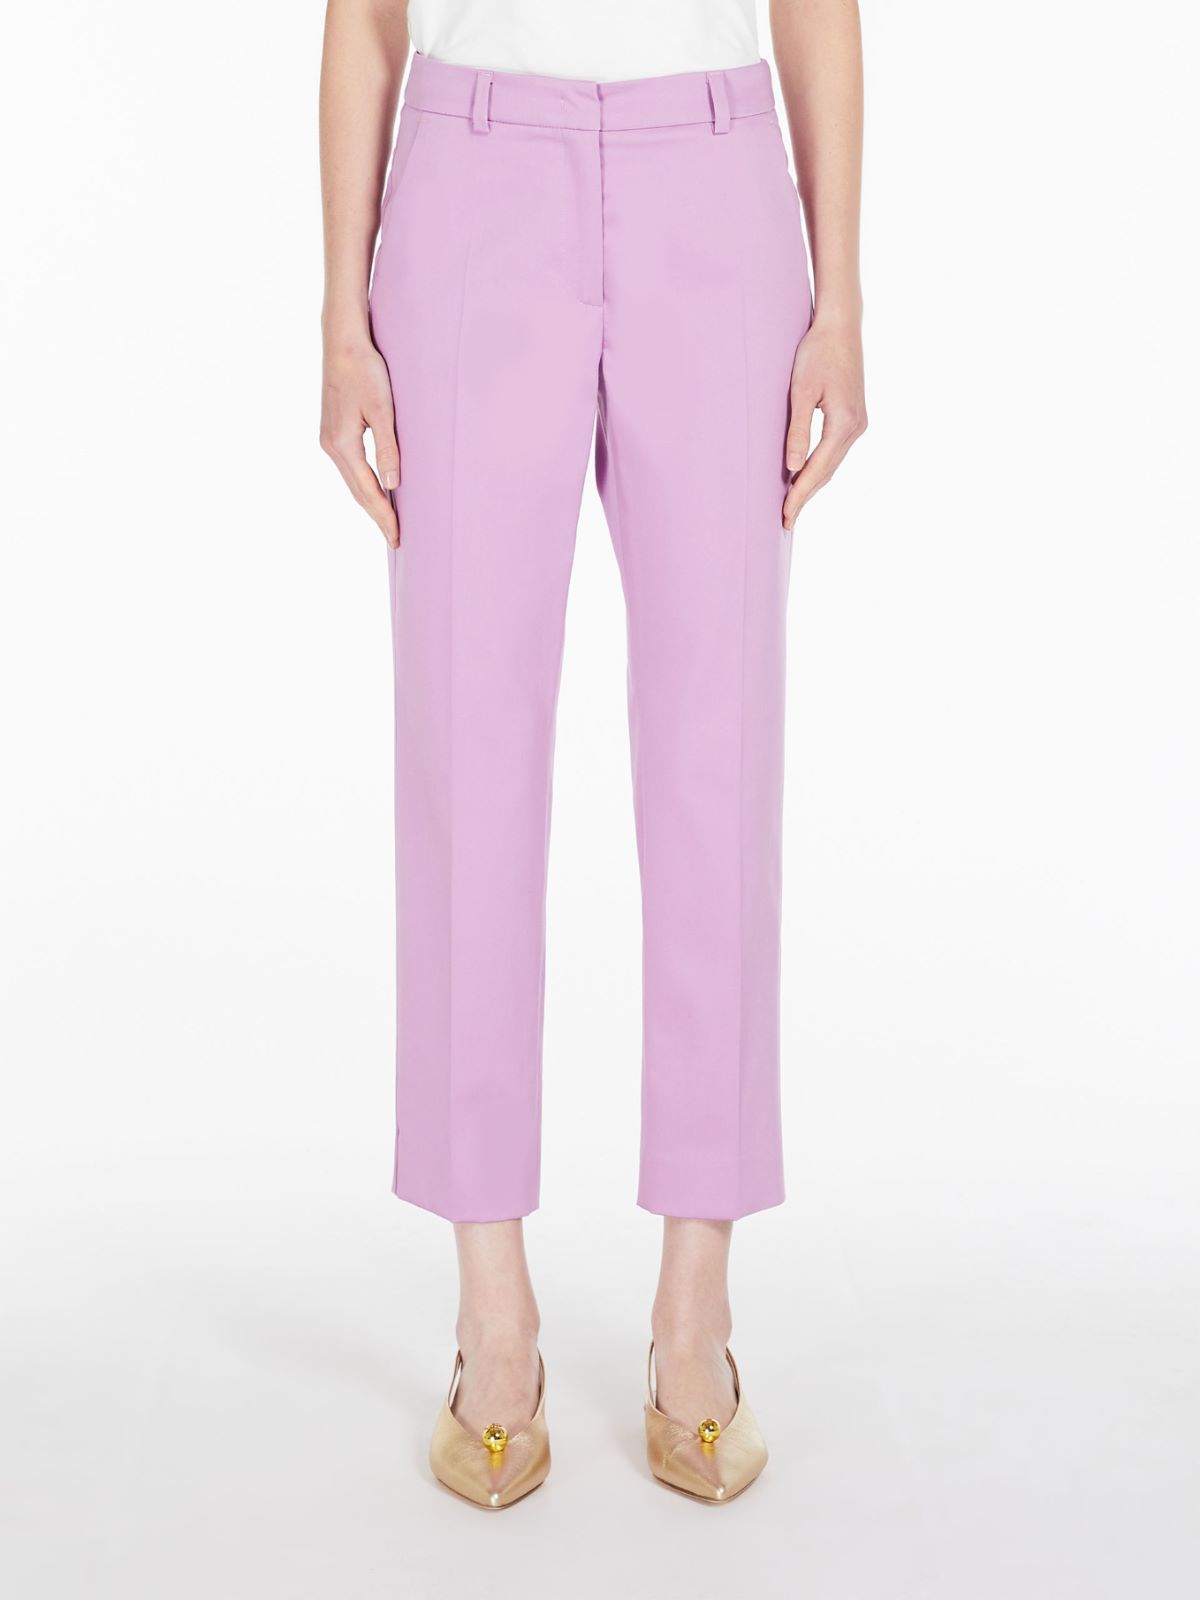 Trousers in stretch satin  - LILAC - Weekend Max Mara - 2